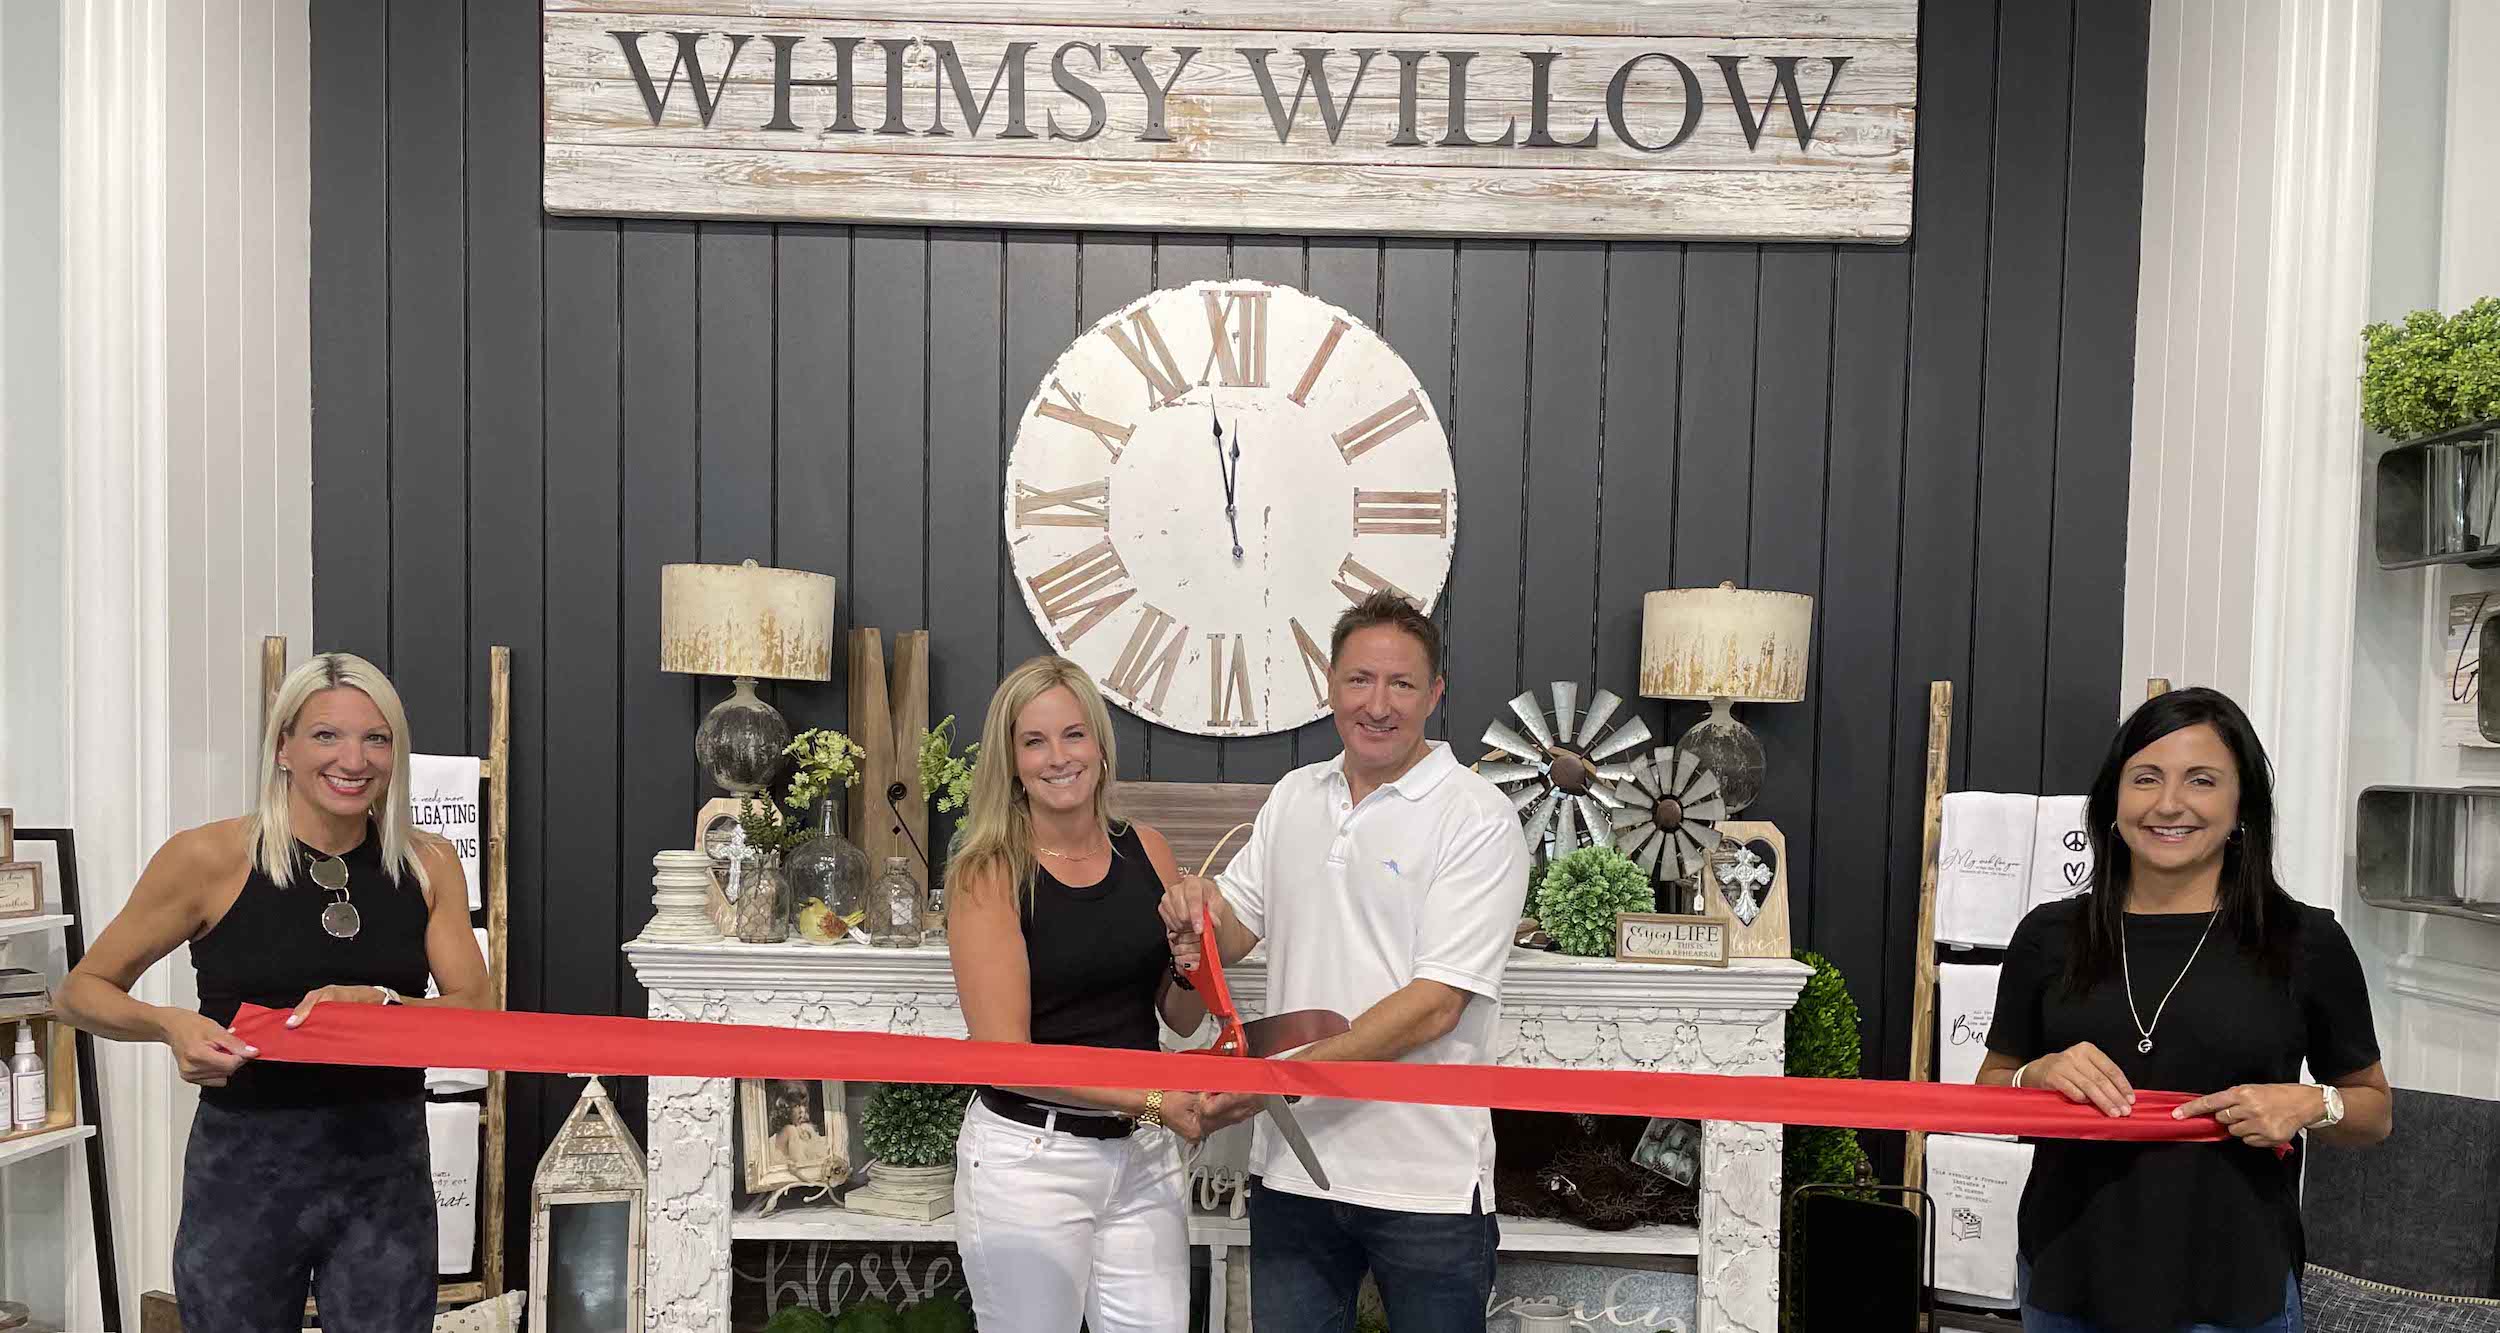 Welcome Whimsy Willow